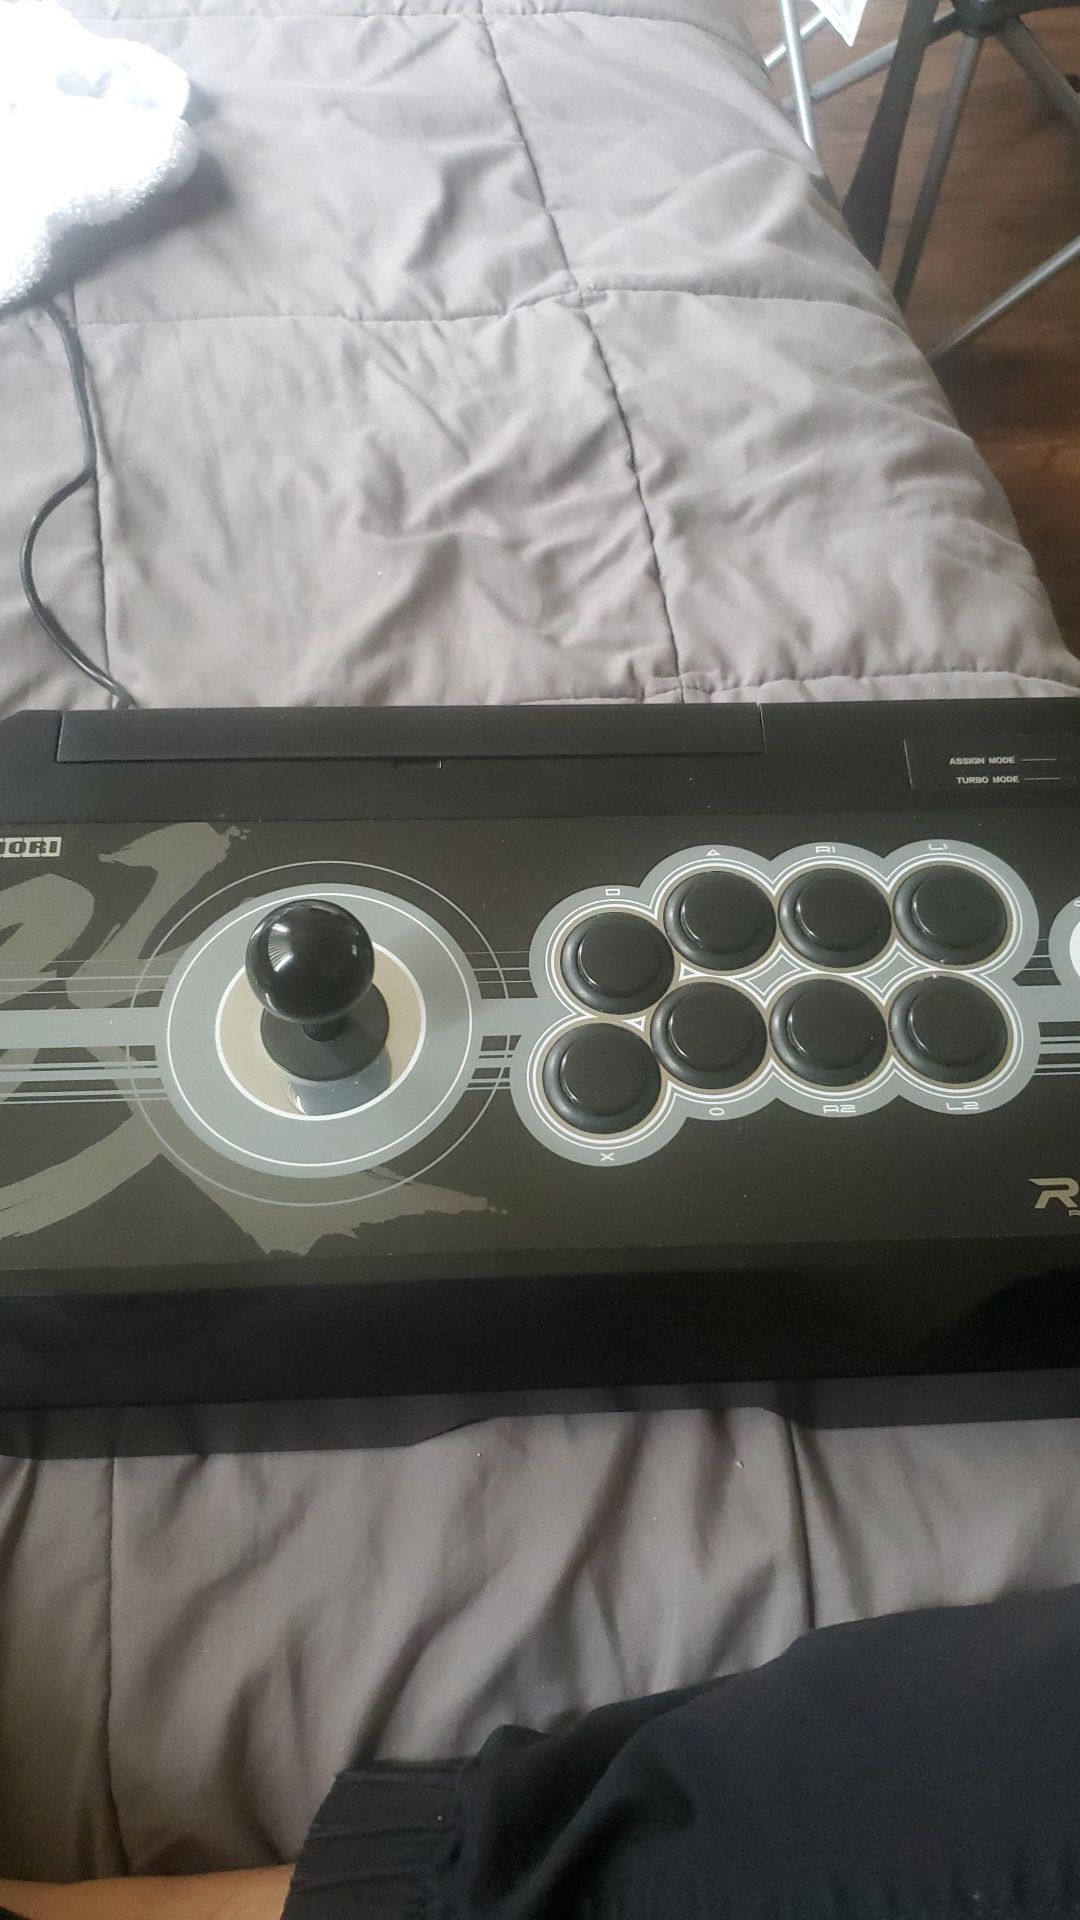 Hori arcade stick for ps4/ps3/PC